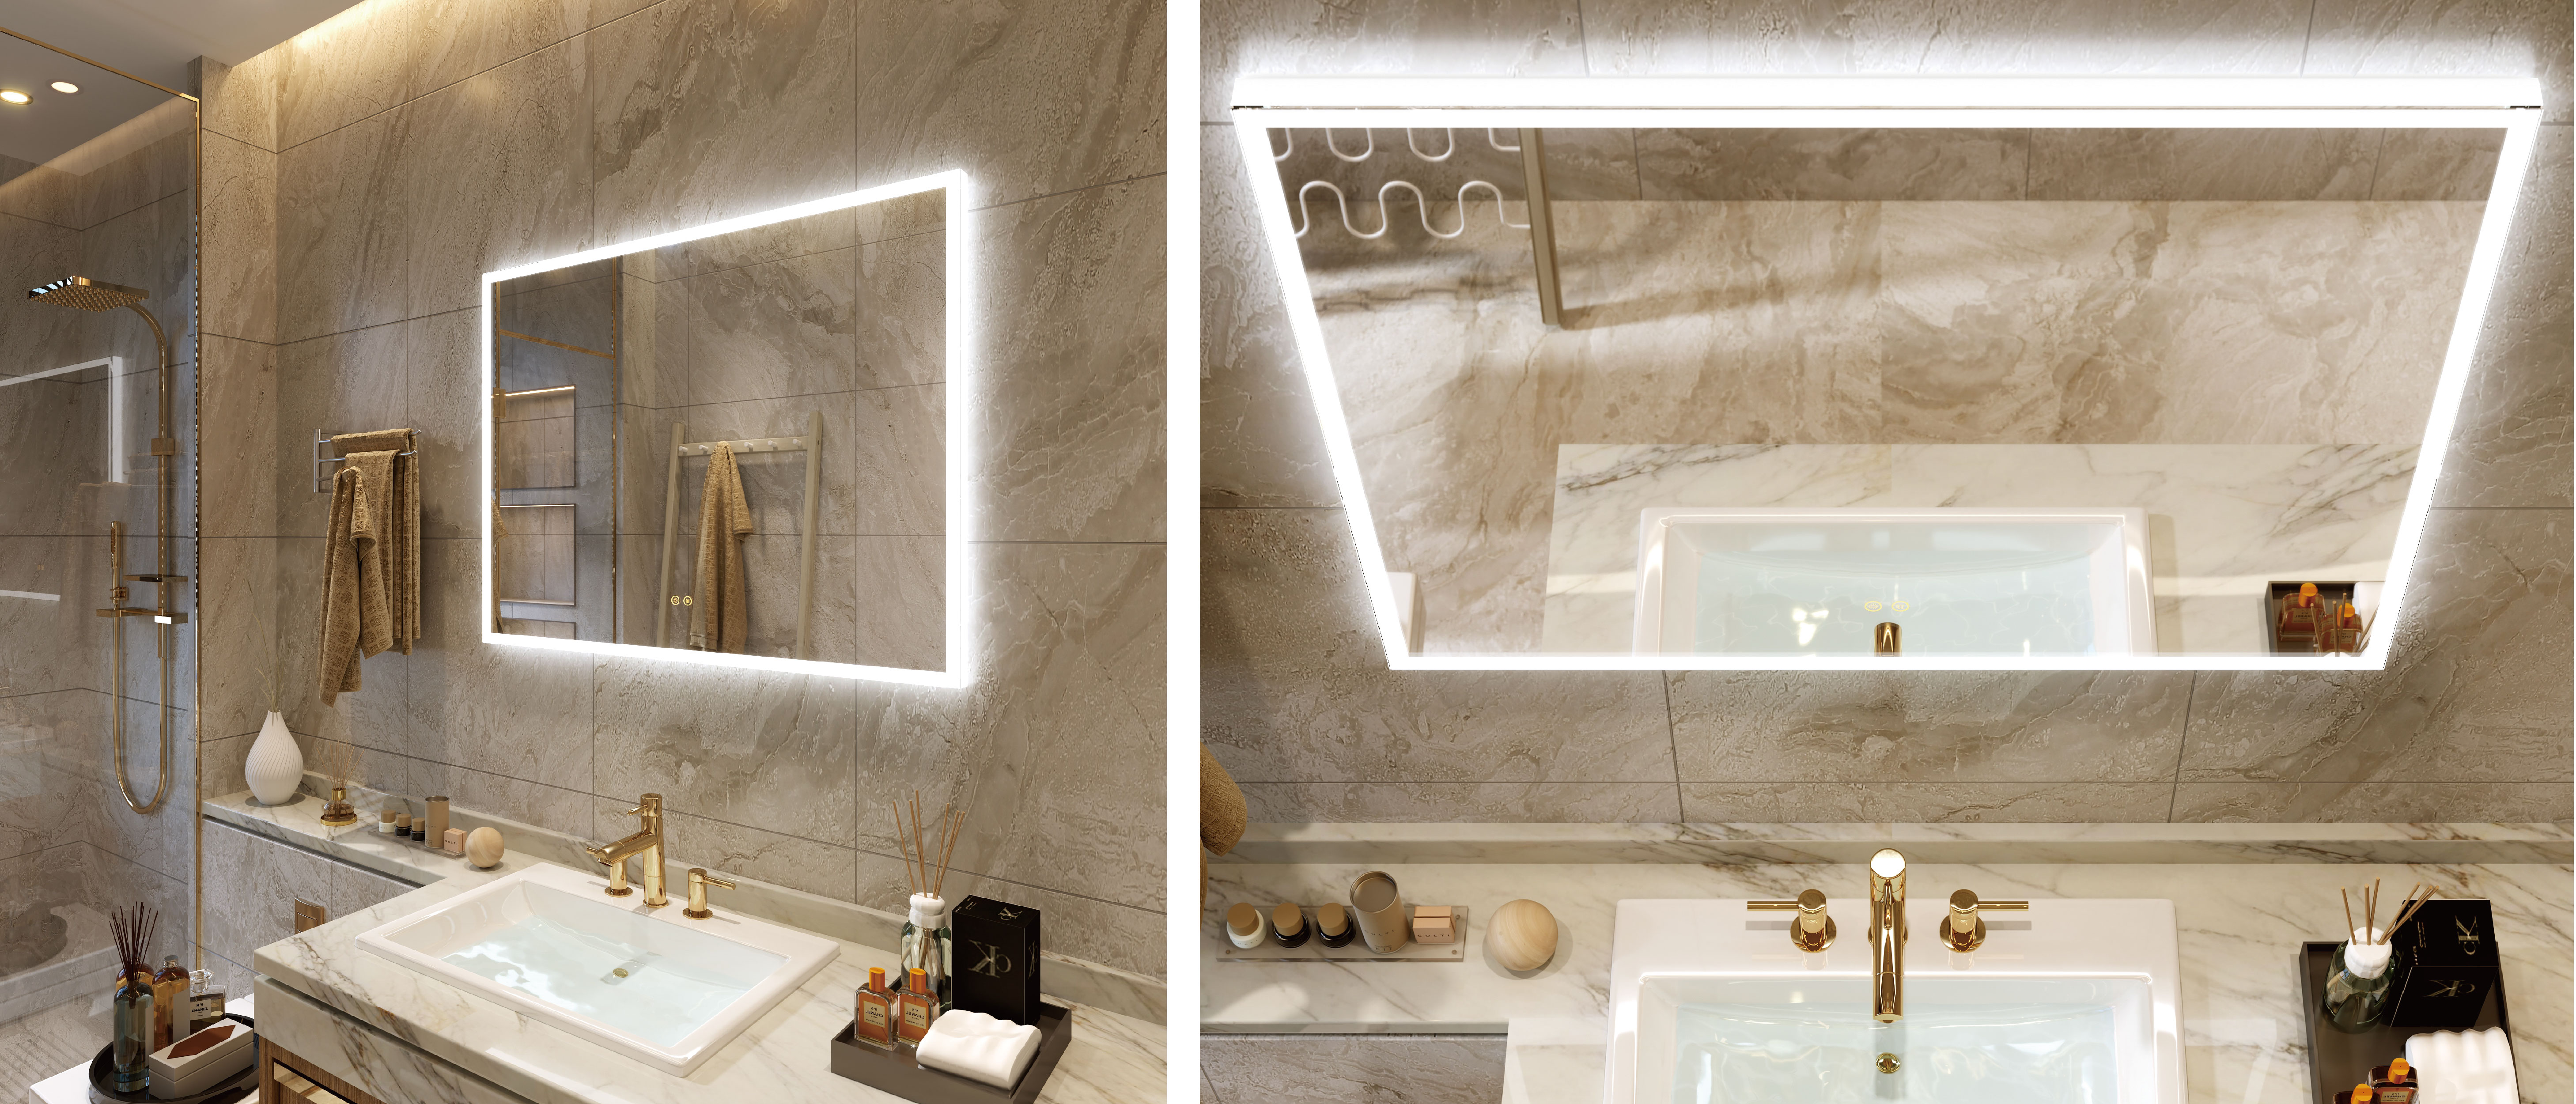 Bathroom Wall Mirrors With LED Light